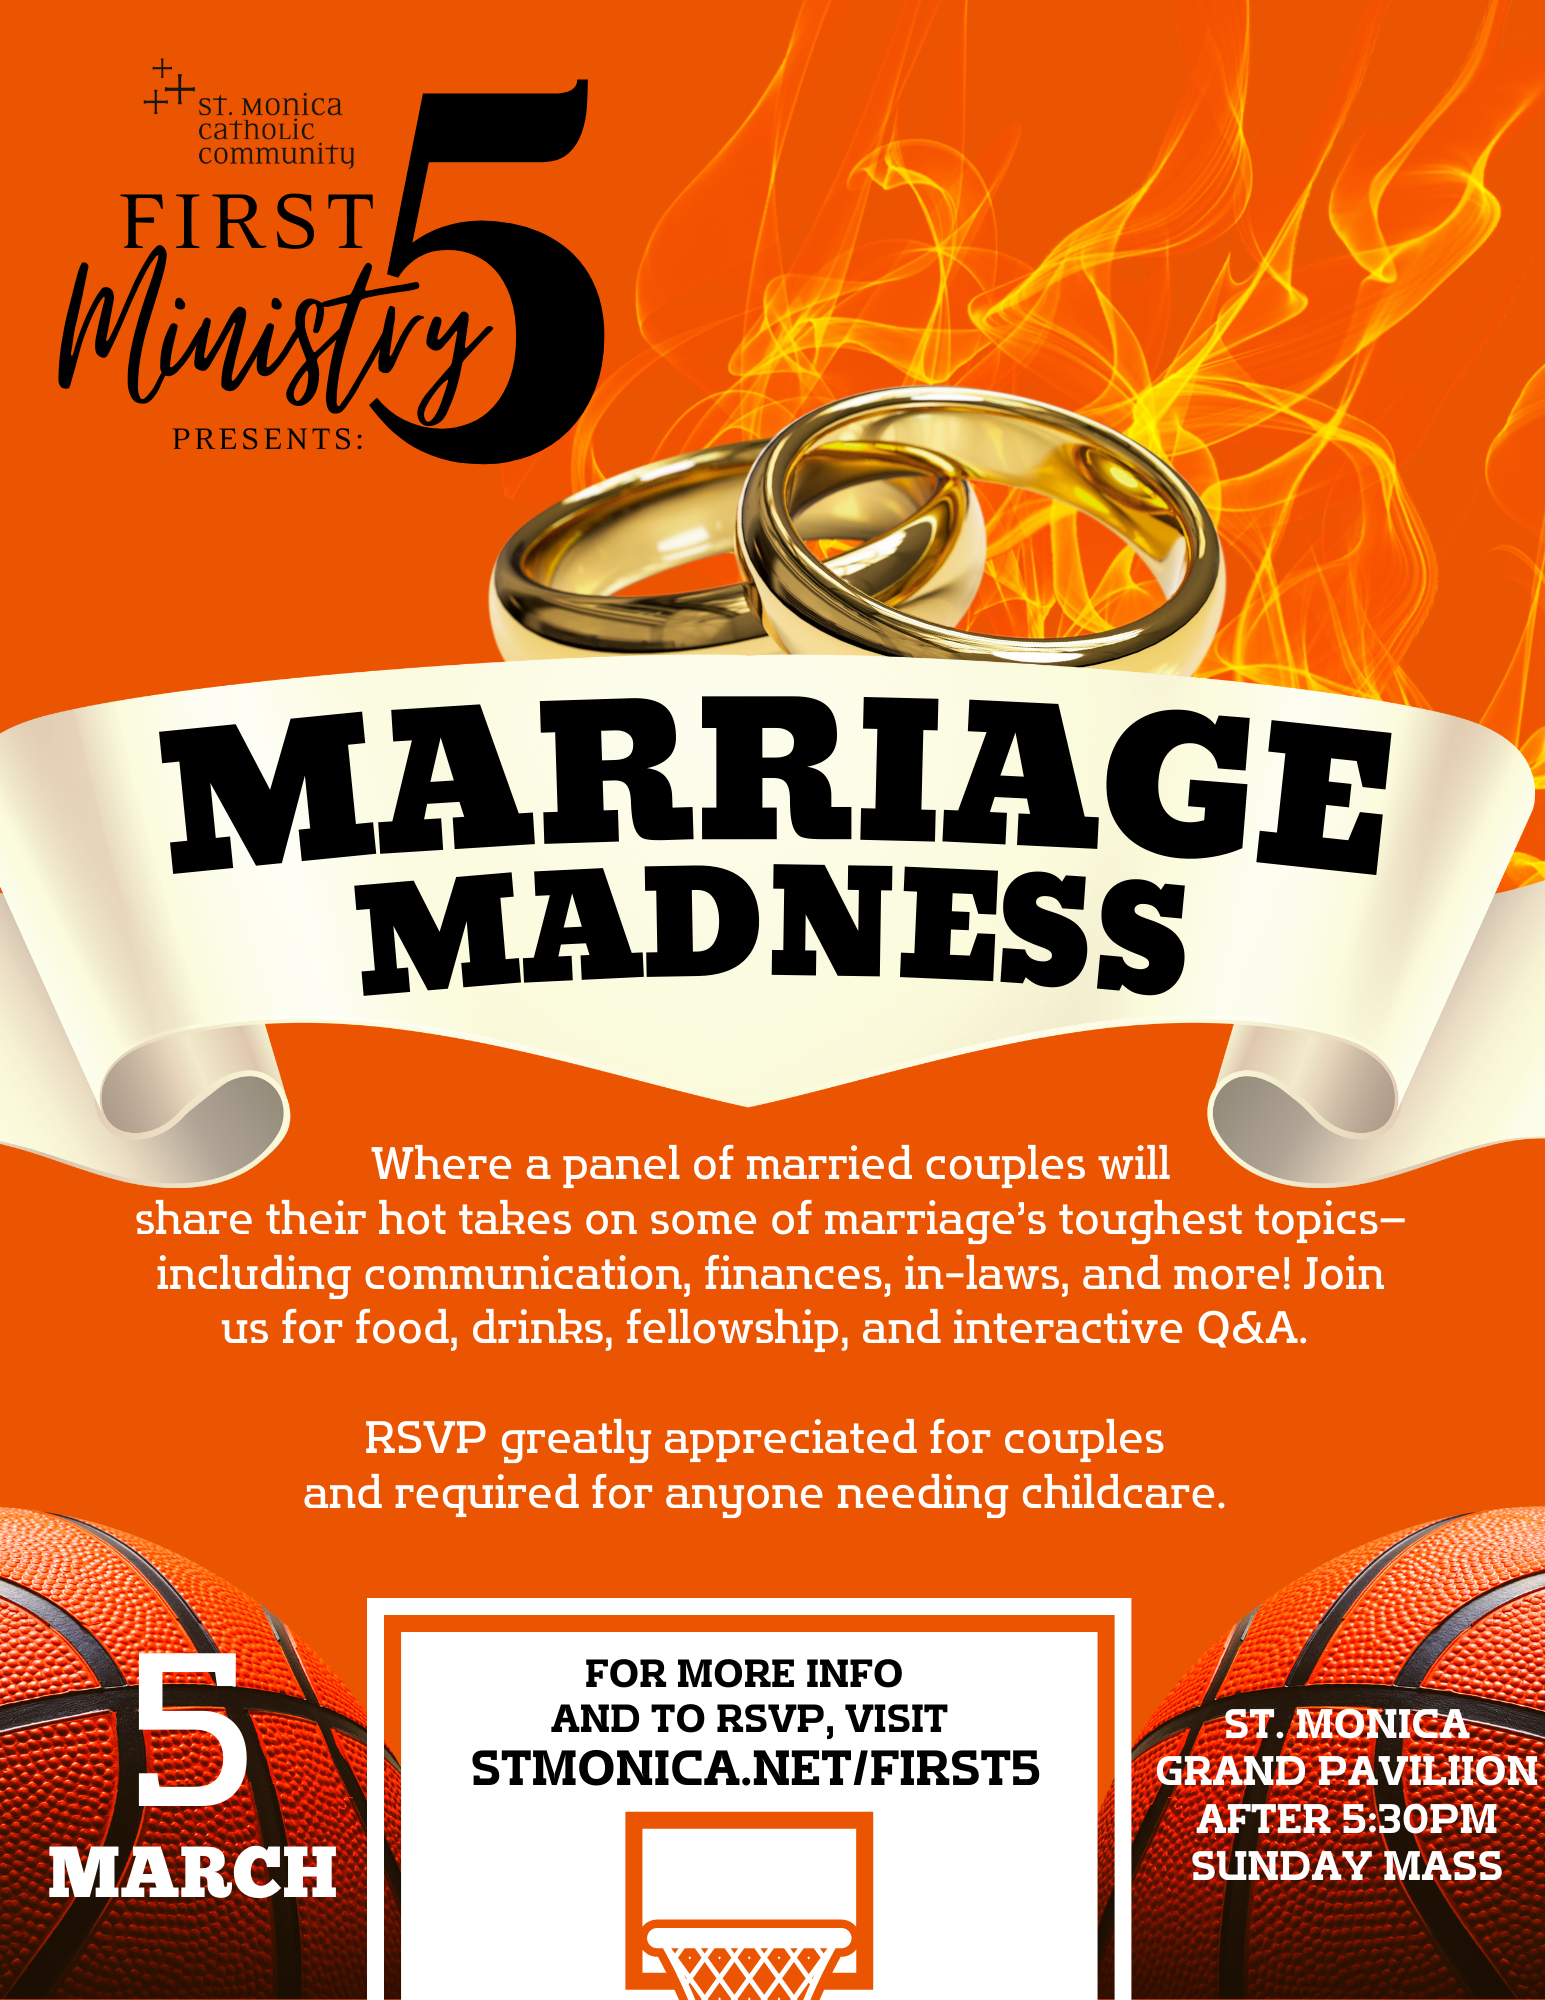 first5 ministry march event flyer 1545 2000 px